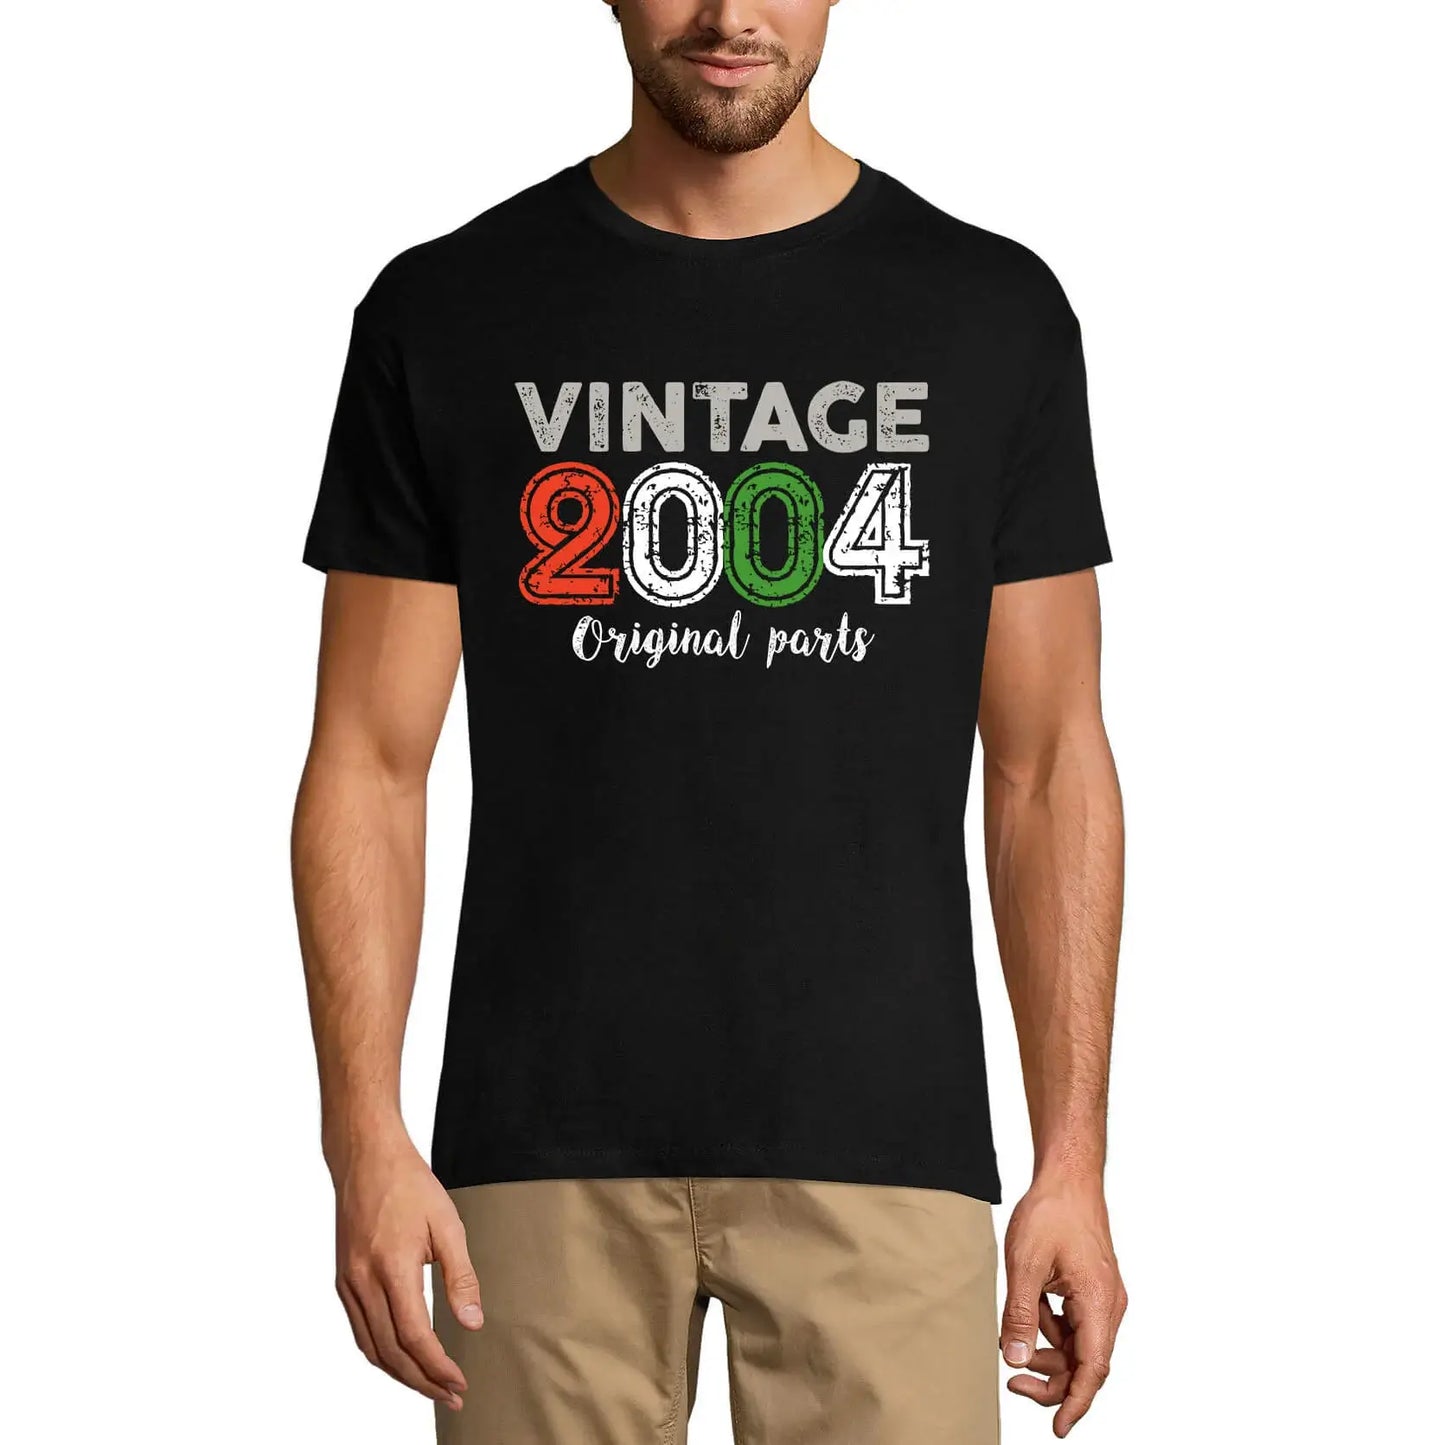 Men's Graphic T-Shirt Original Parts 2004 20th Birthday Anniversary 20 Year Old Gift 2004 Vintage Eco-Friendly Short Sleeve Novelty Tee